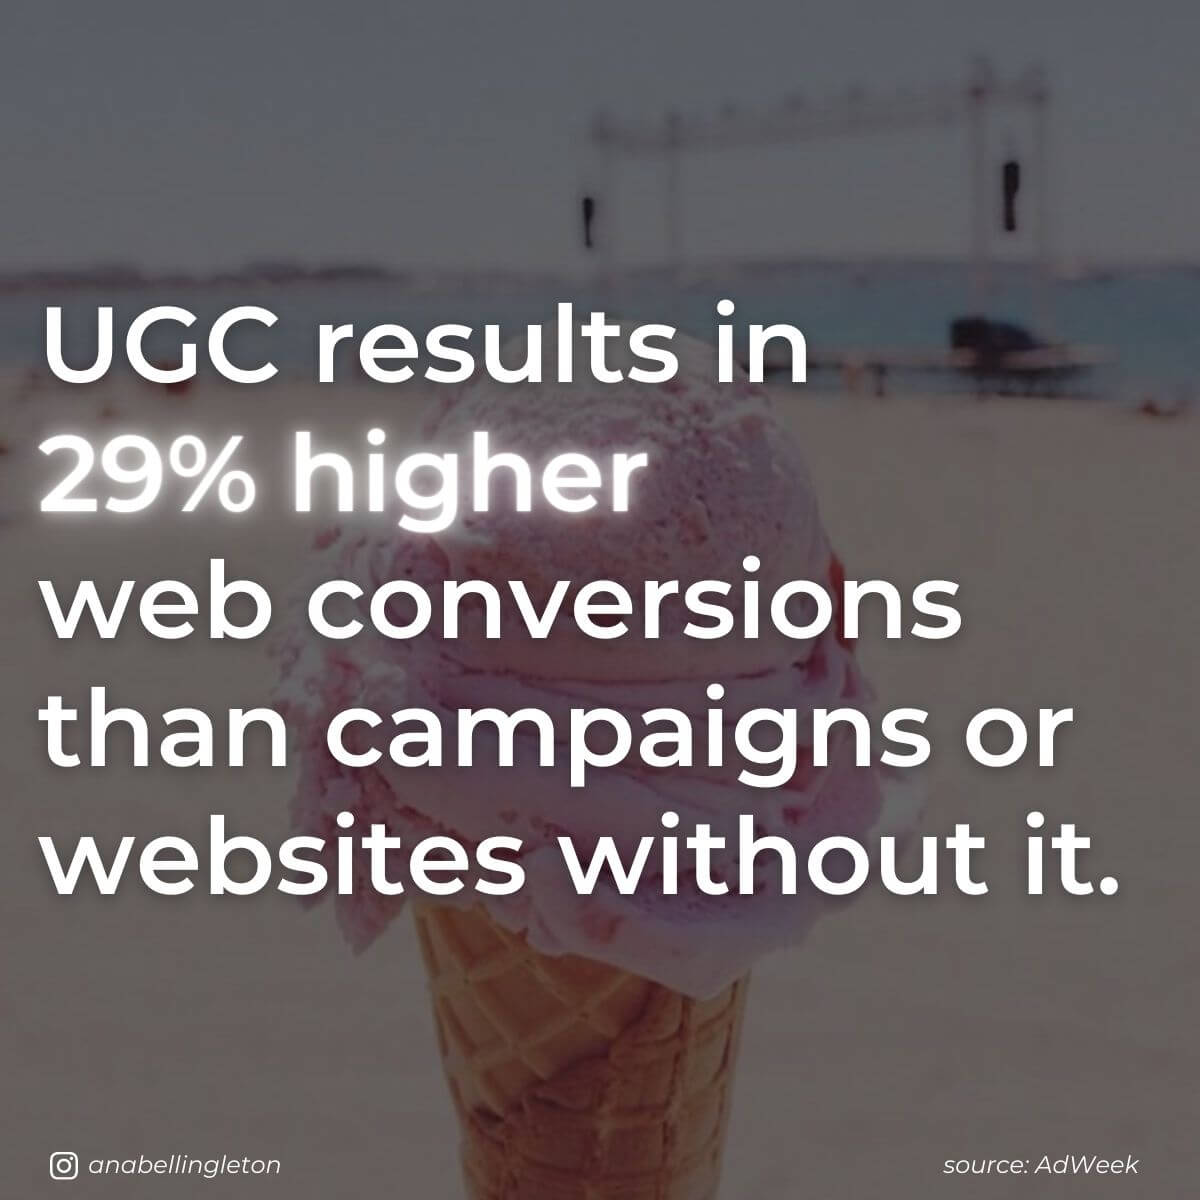 Hospitality Marketing Strategy Quote: UGC results in 29% higher web conversions than campaigns or websites without it. (AdWeek)